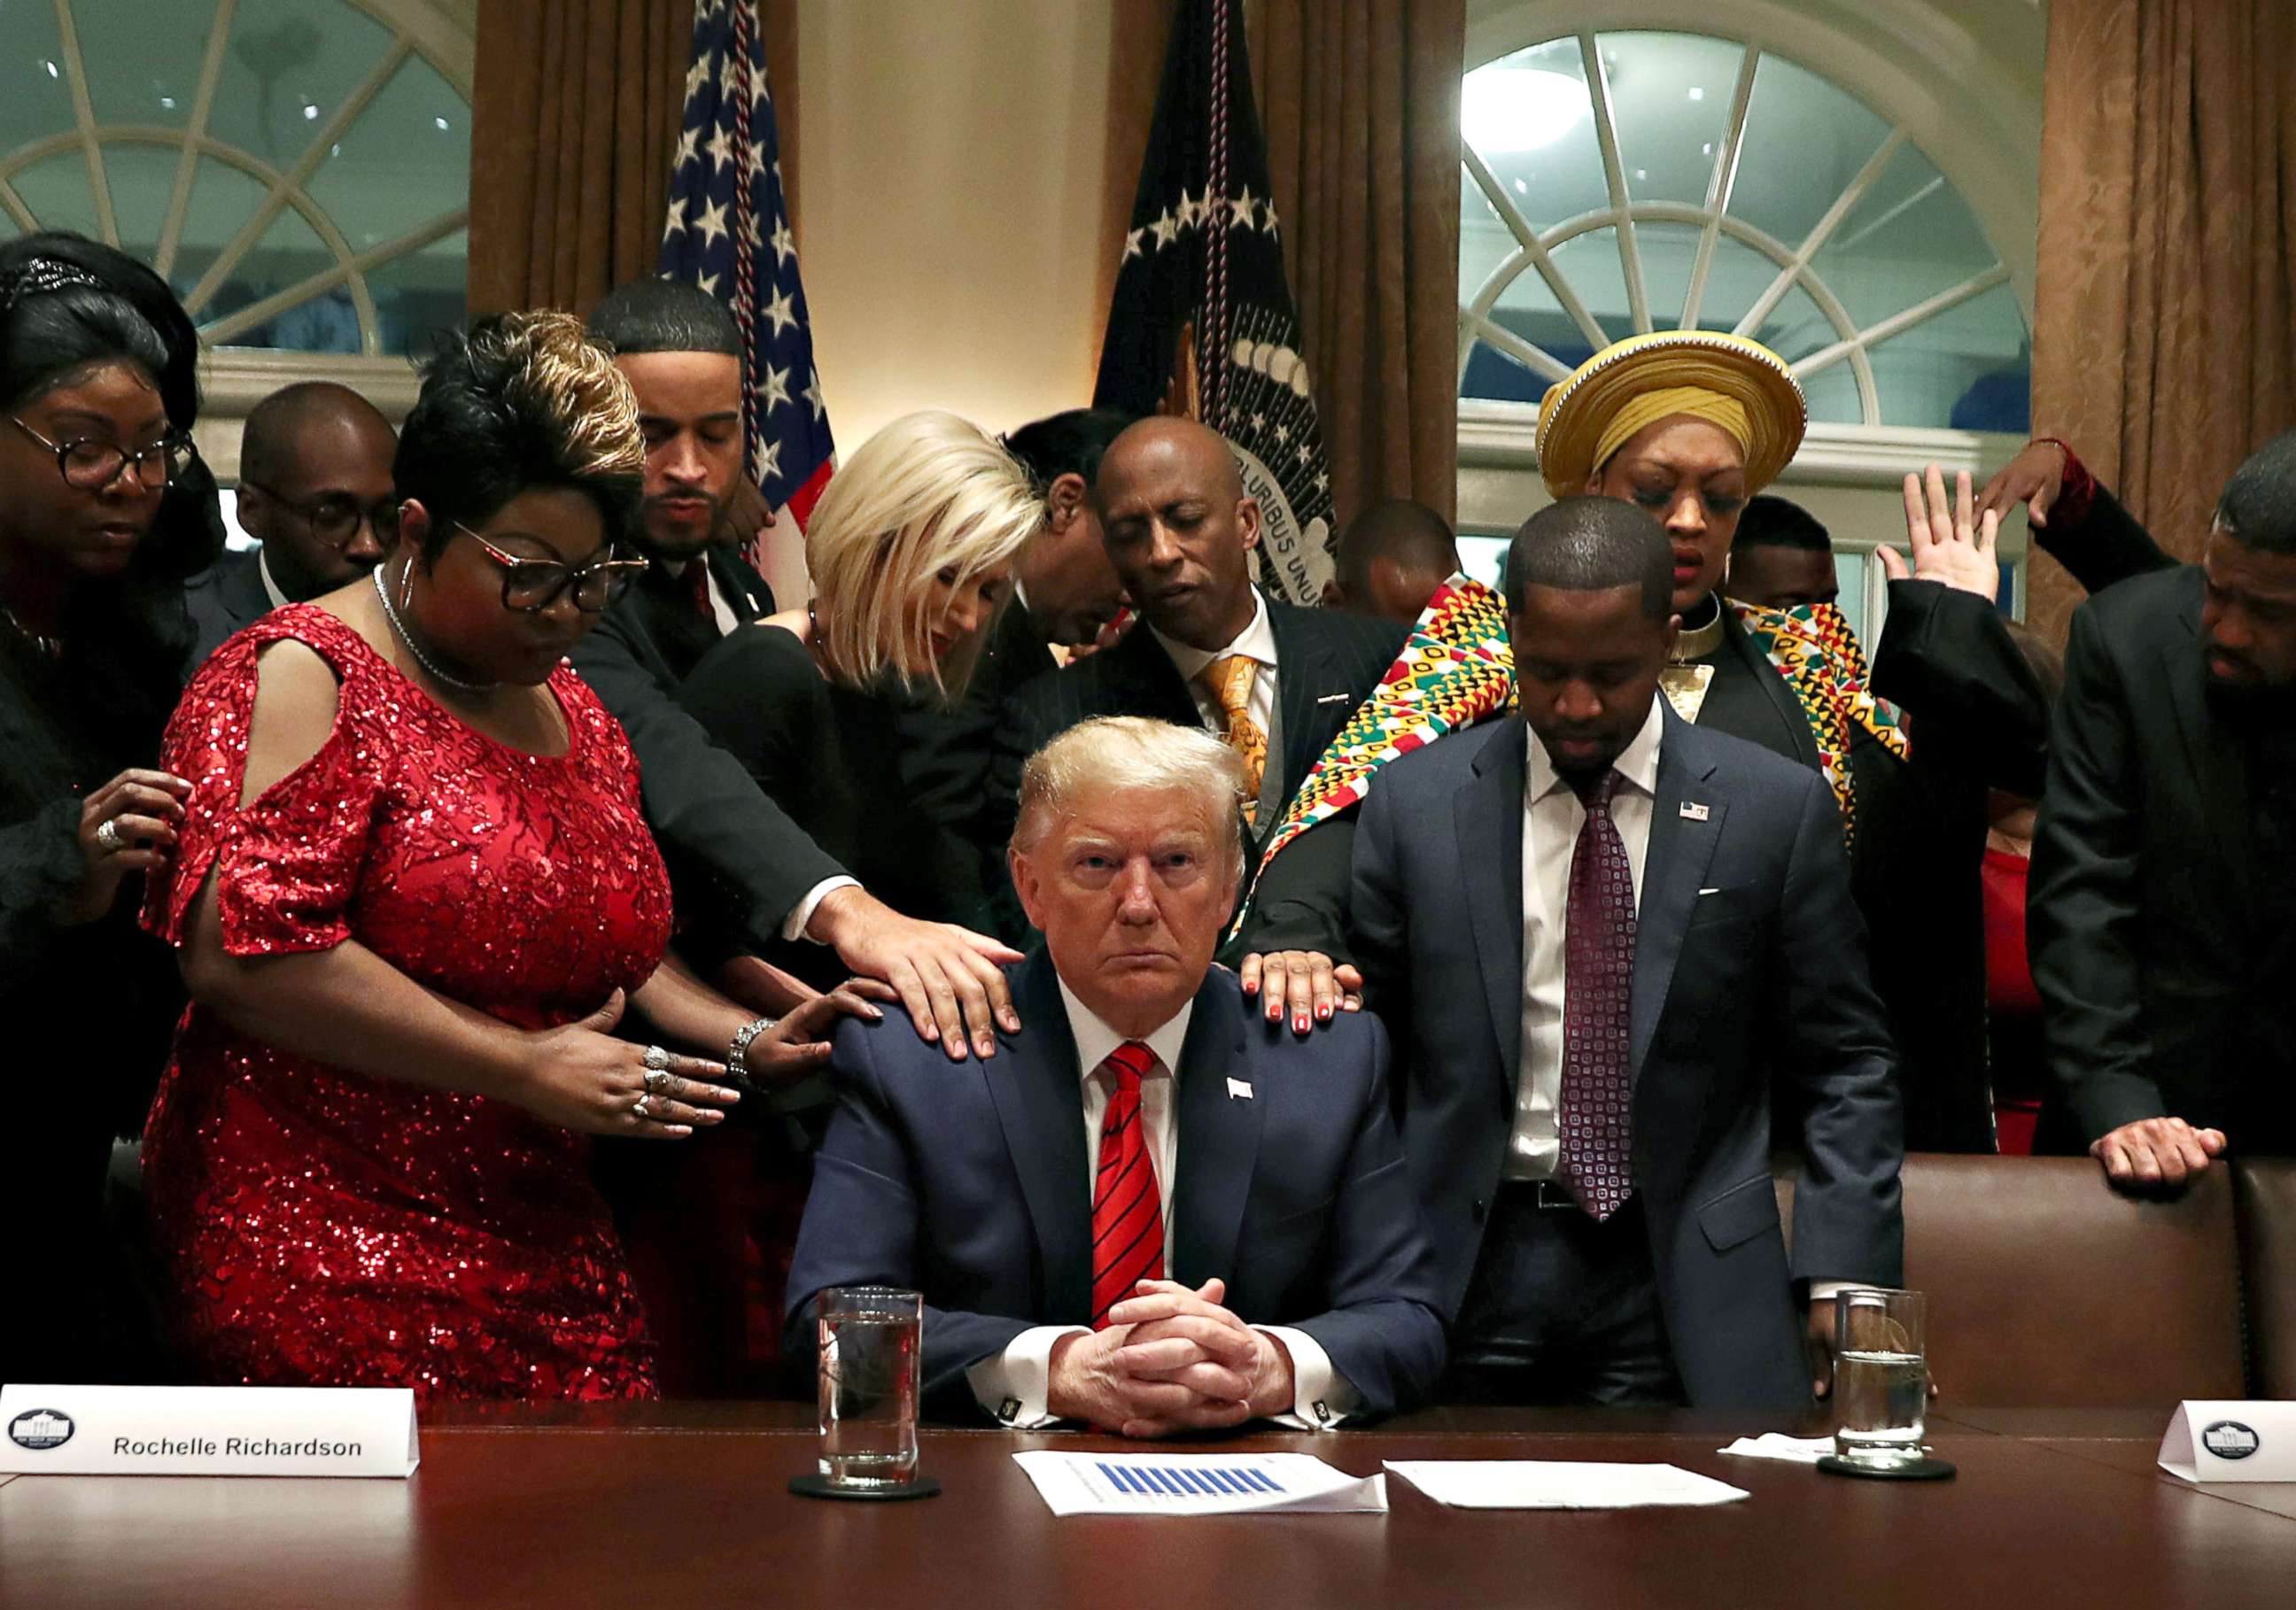 PHOTO: African-American supporters, including Terrence Williams, Angela Stanton and Diamond and Silk, pray with President Donald Trump in the Cabinet Room of the White House, in Washington on Feb. 27, 2020.